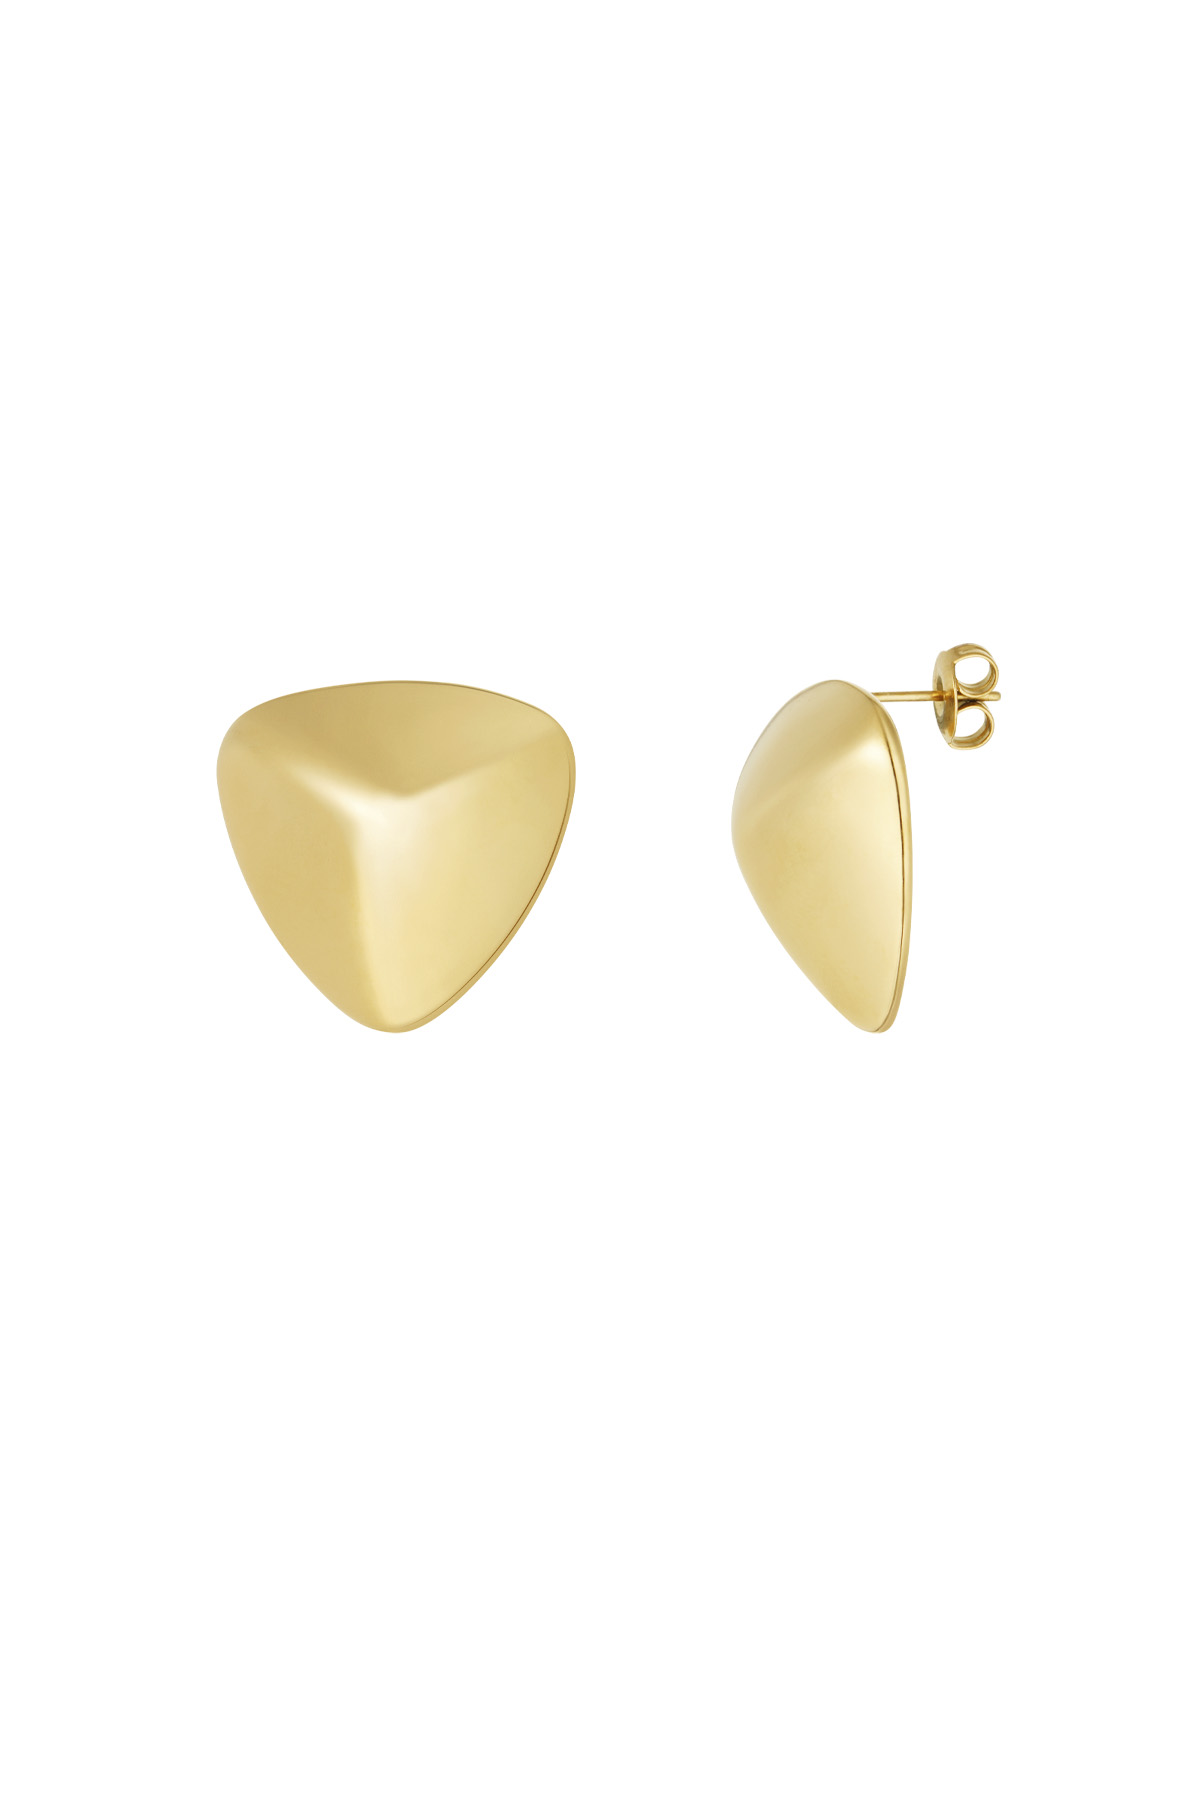 Earrings triangle stud - gold h5 